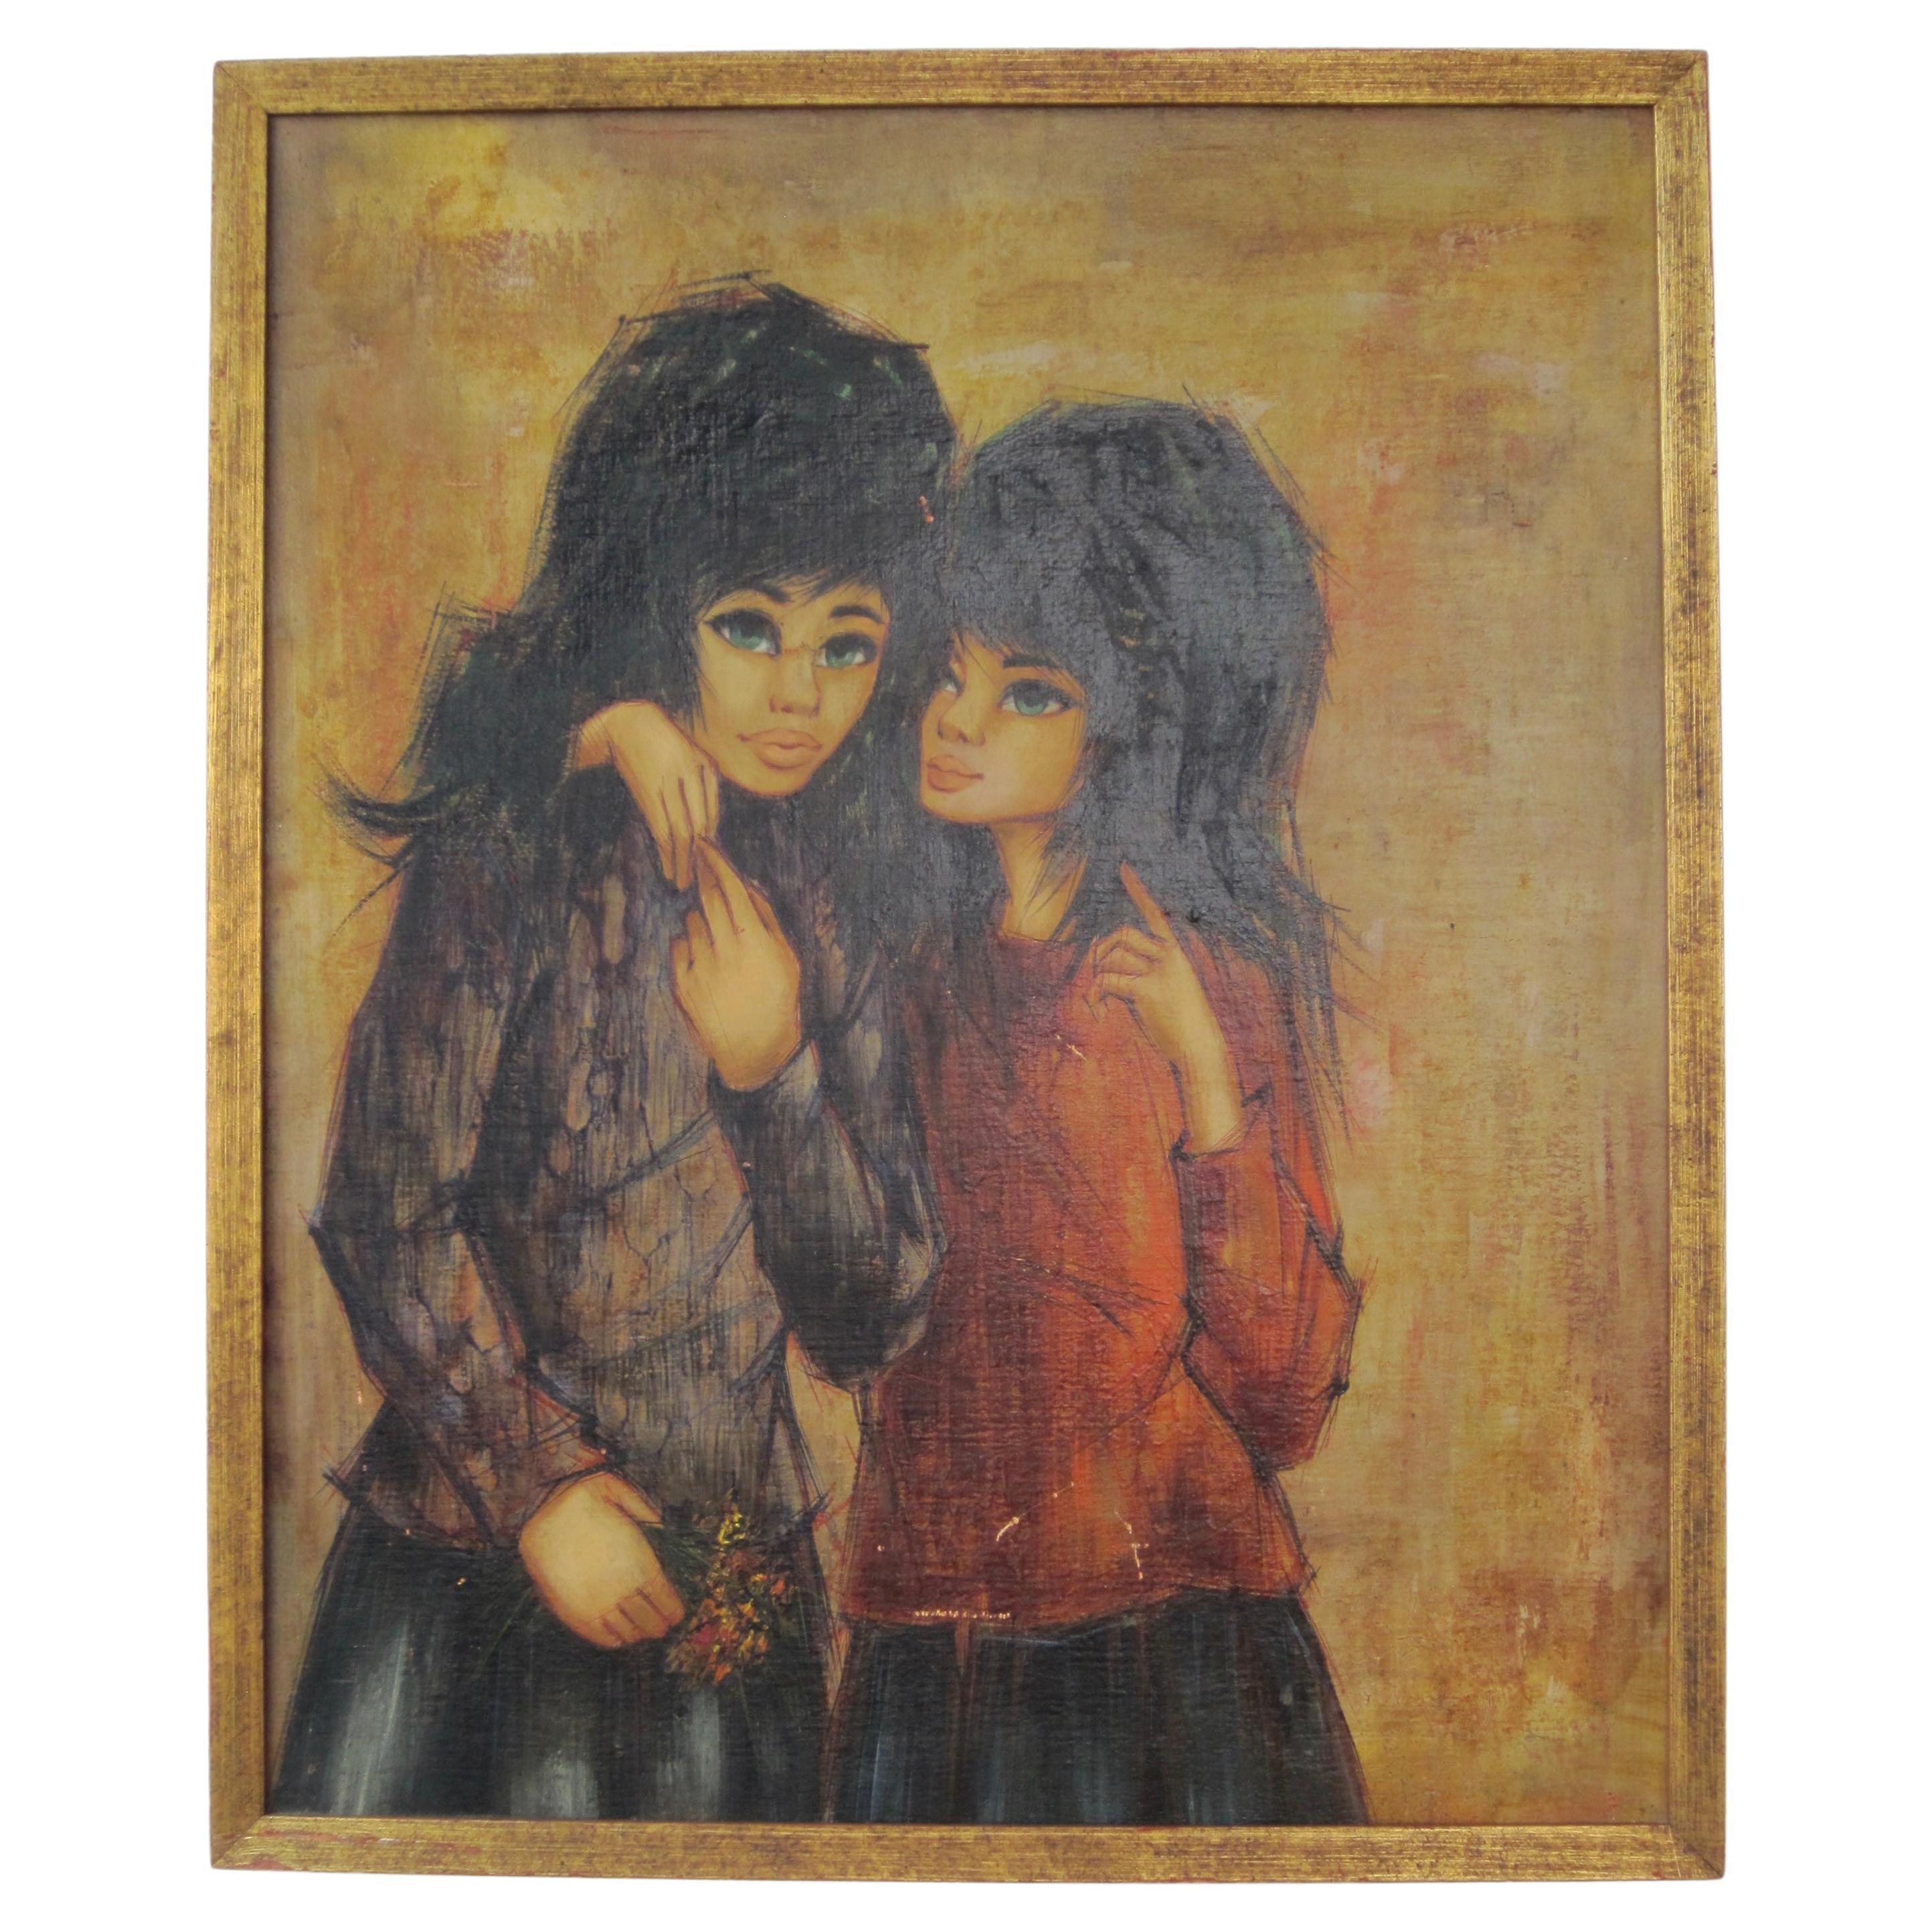 Offering an as found framed original mid-century oil painting on board of two gothic style teenage girls, perhaps sisters. 

Most likely influenced by the pop surrealism 